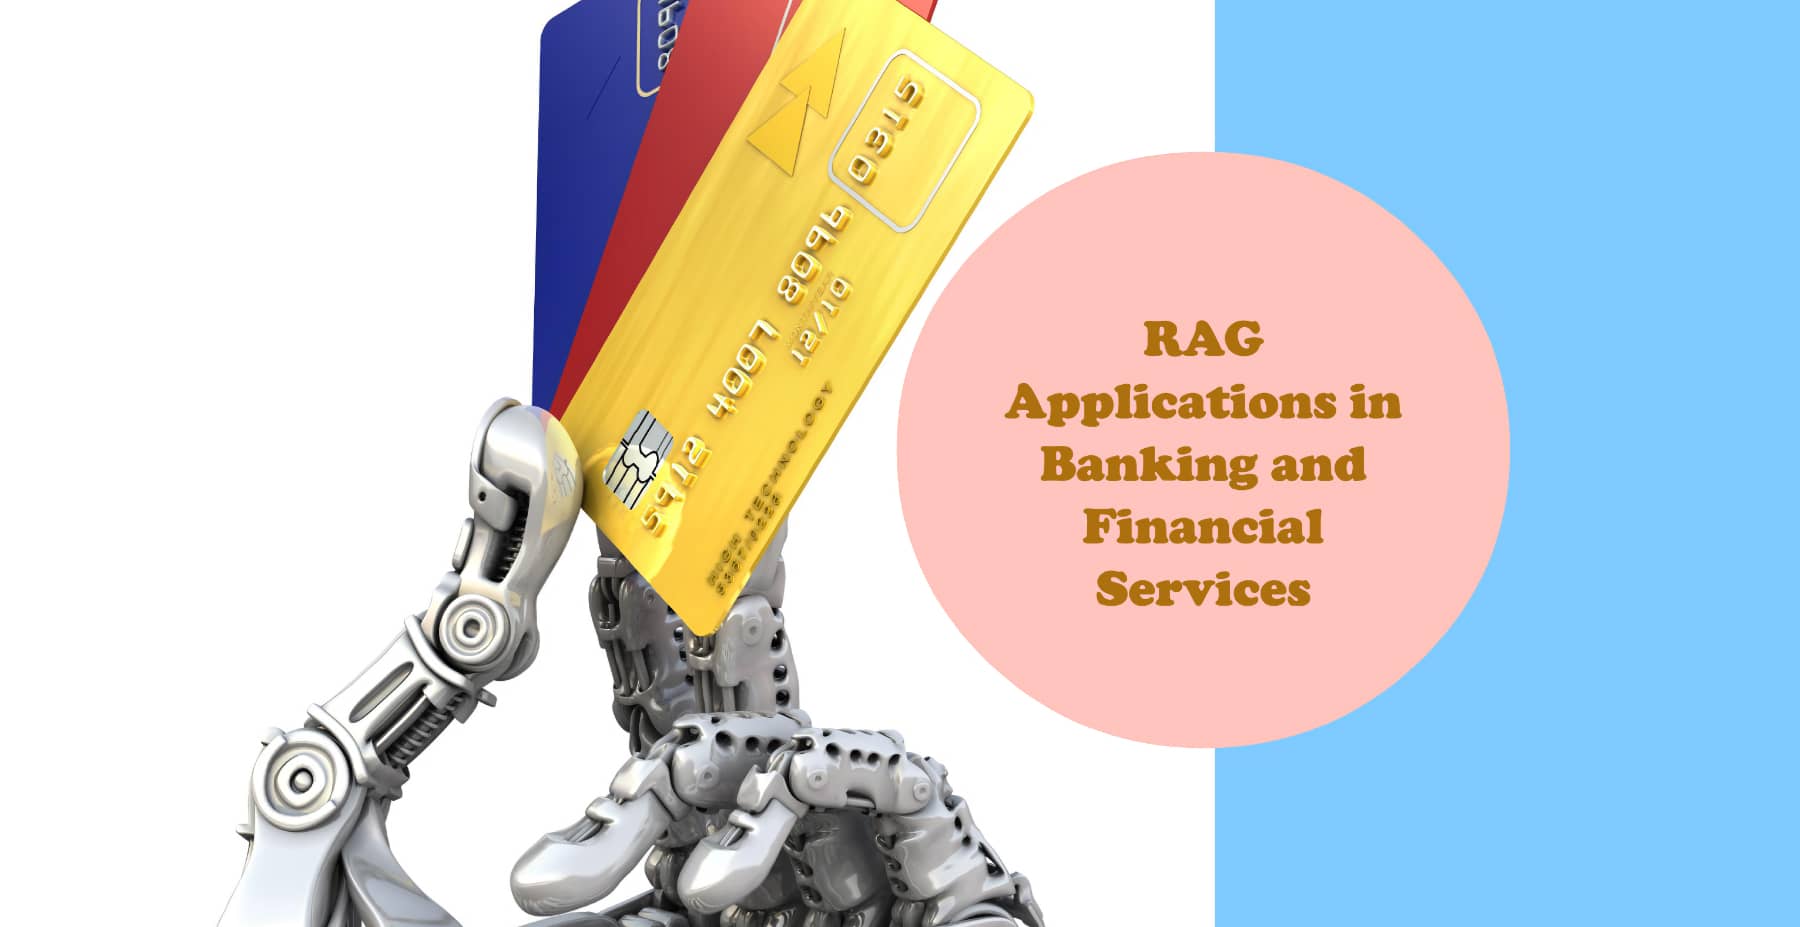 RAG Applications in Banking and Financial Services